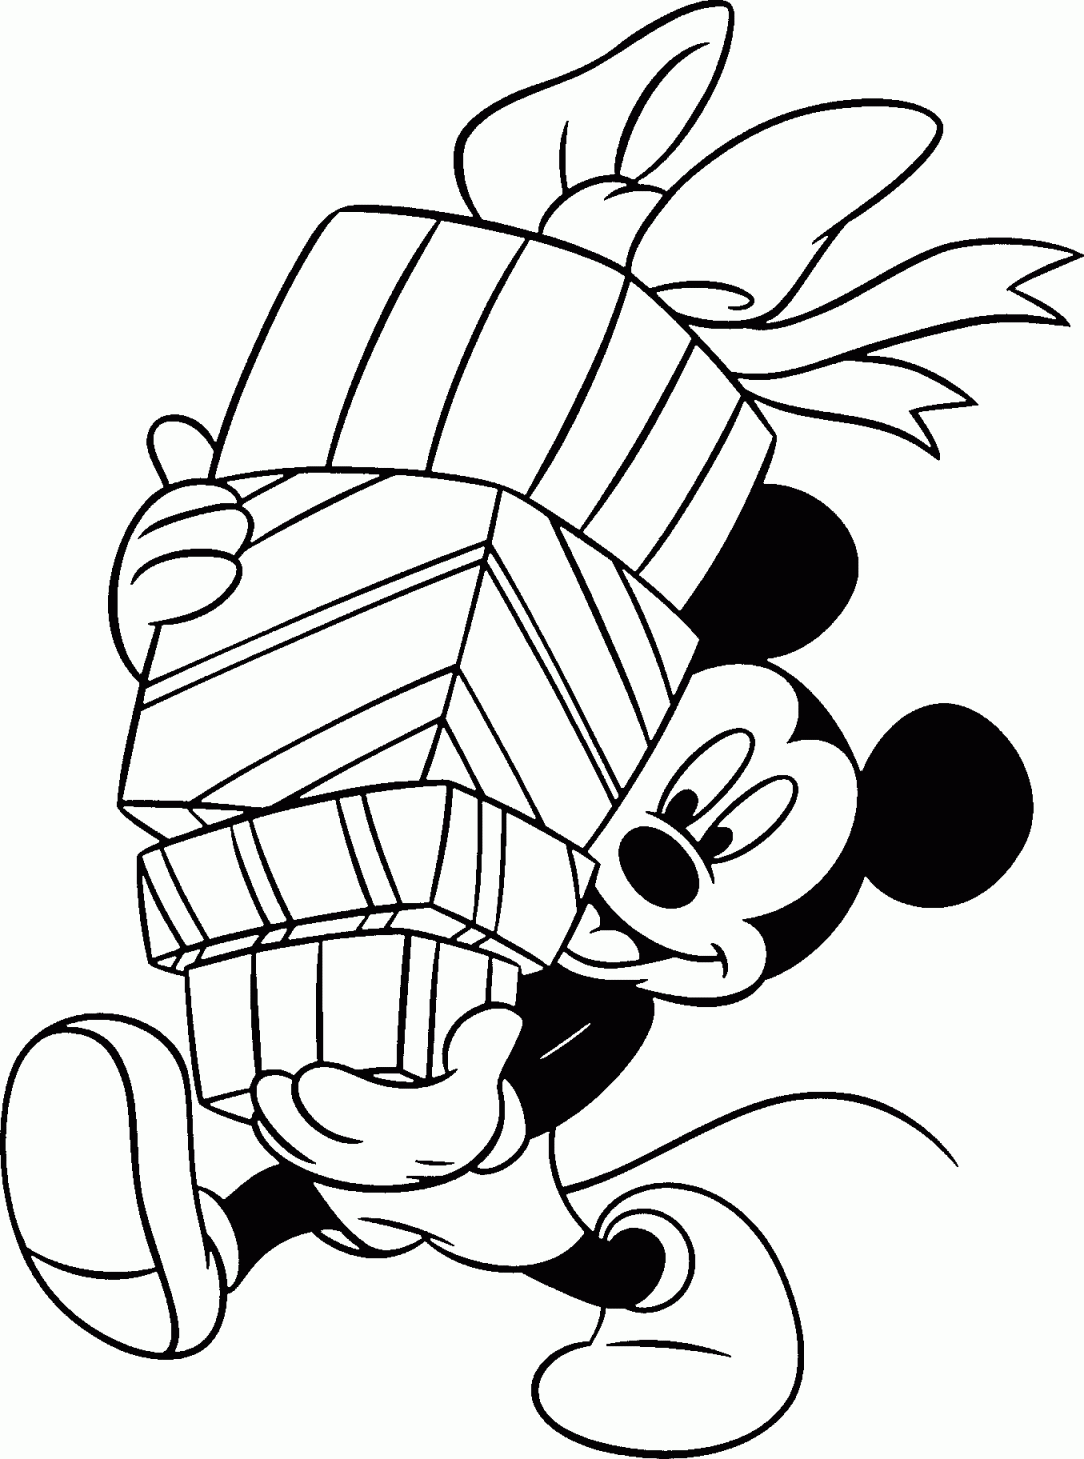 Mickey Mouse S - Coloring Pages for Kids and for Adults